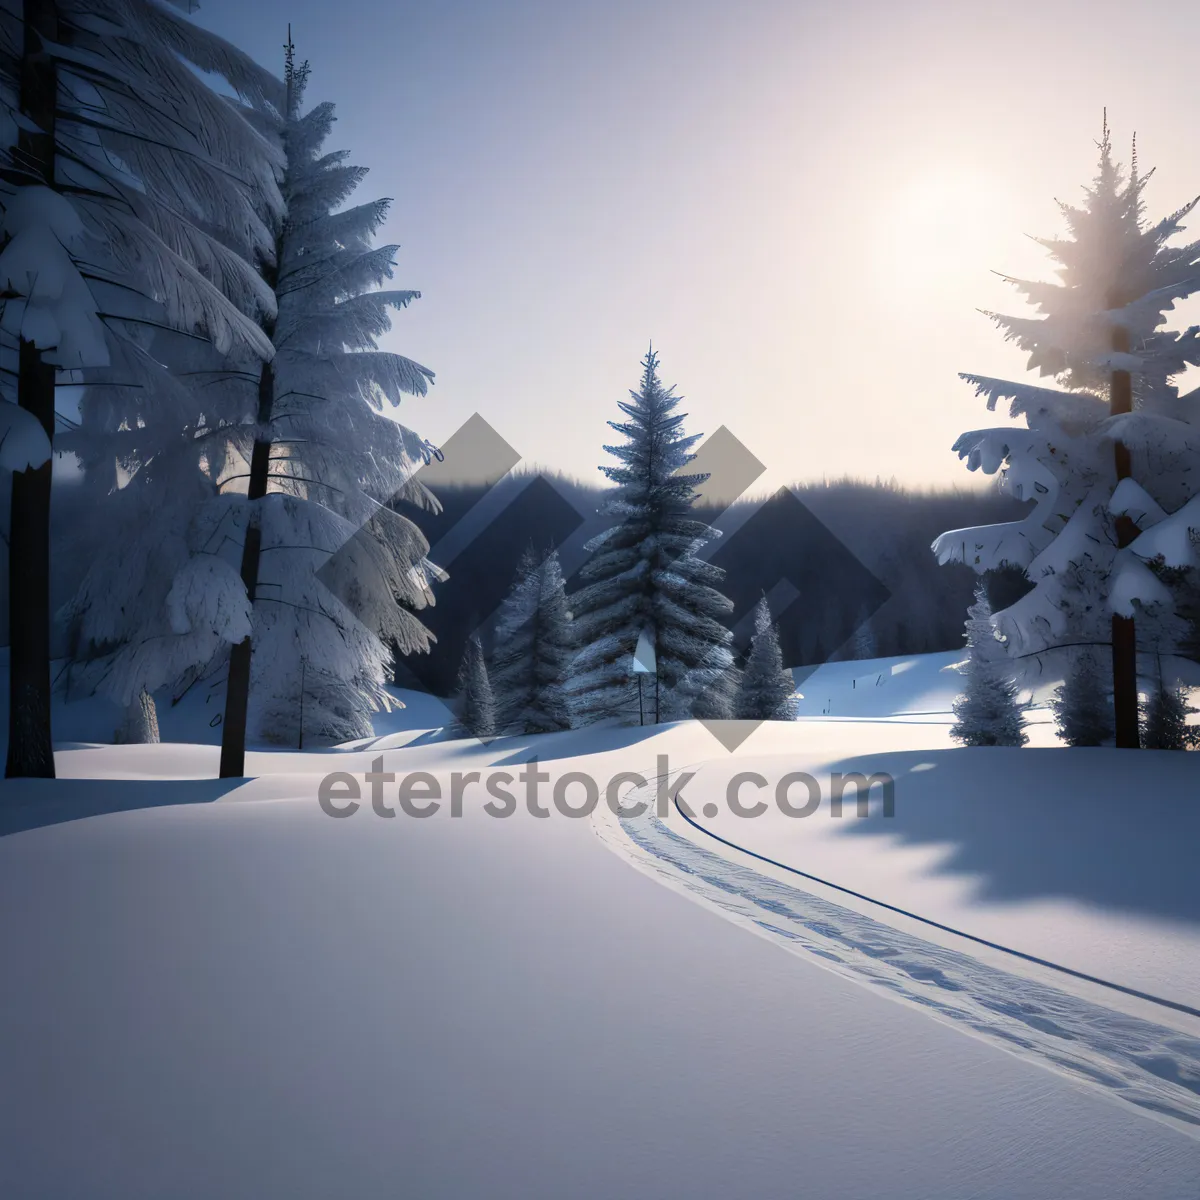 Picture of Frosty Alpine Wonderland: Snowy Mountains and Evergreen Trees